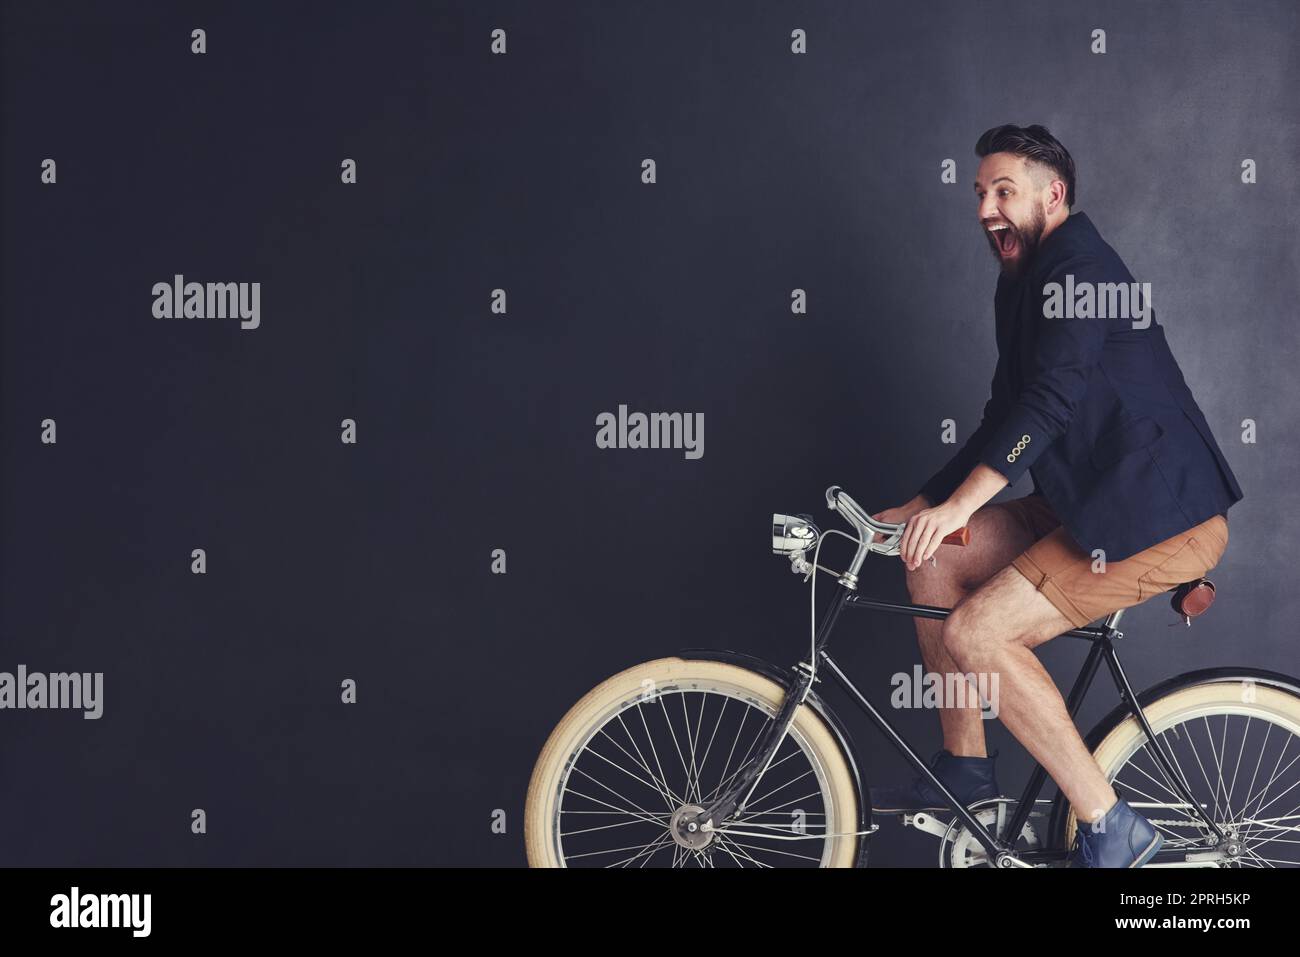 Bicycles fill him with childlike joy. a trendy young man riding a bicycle in studio. Stock Photo